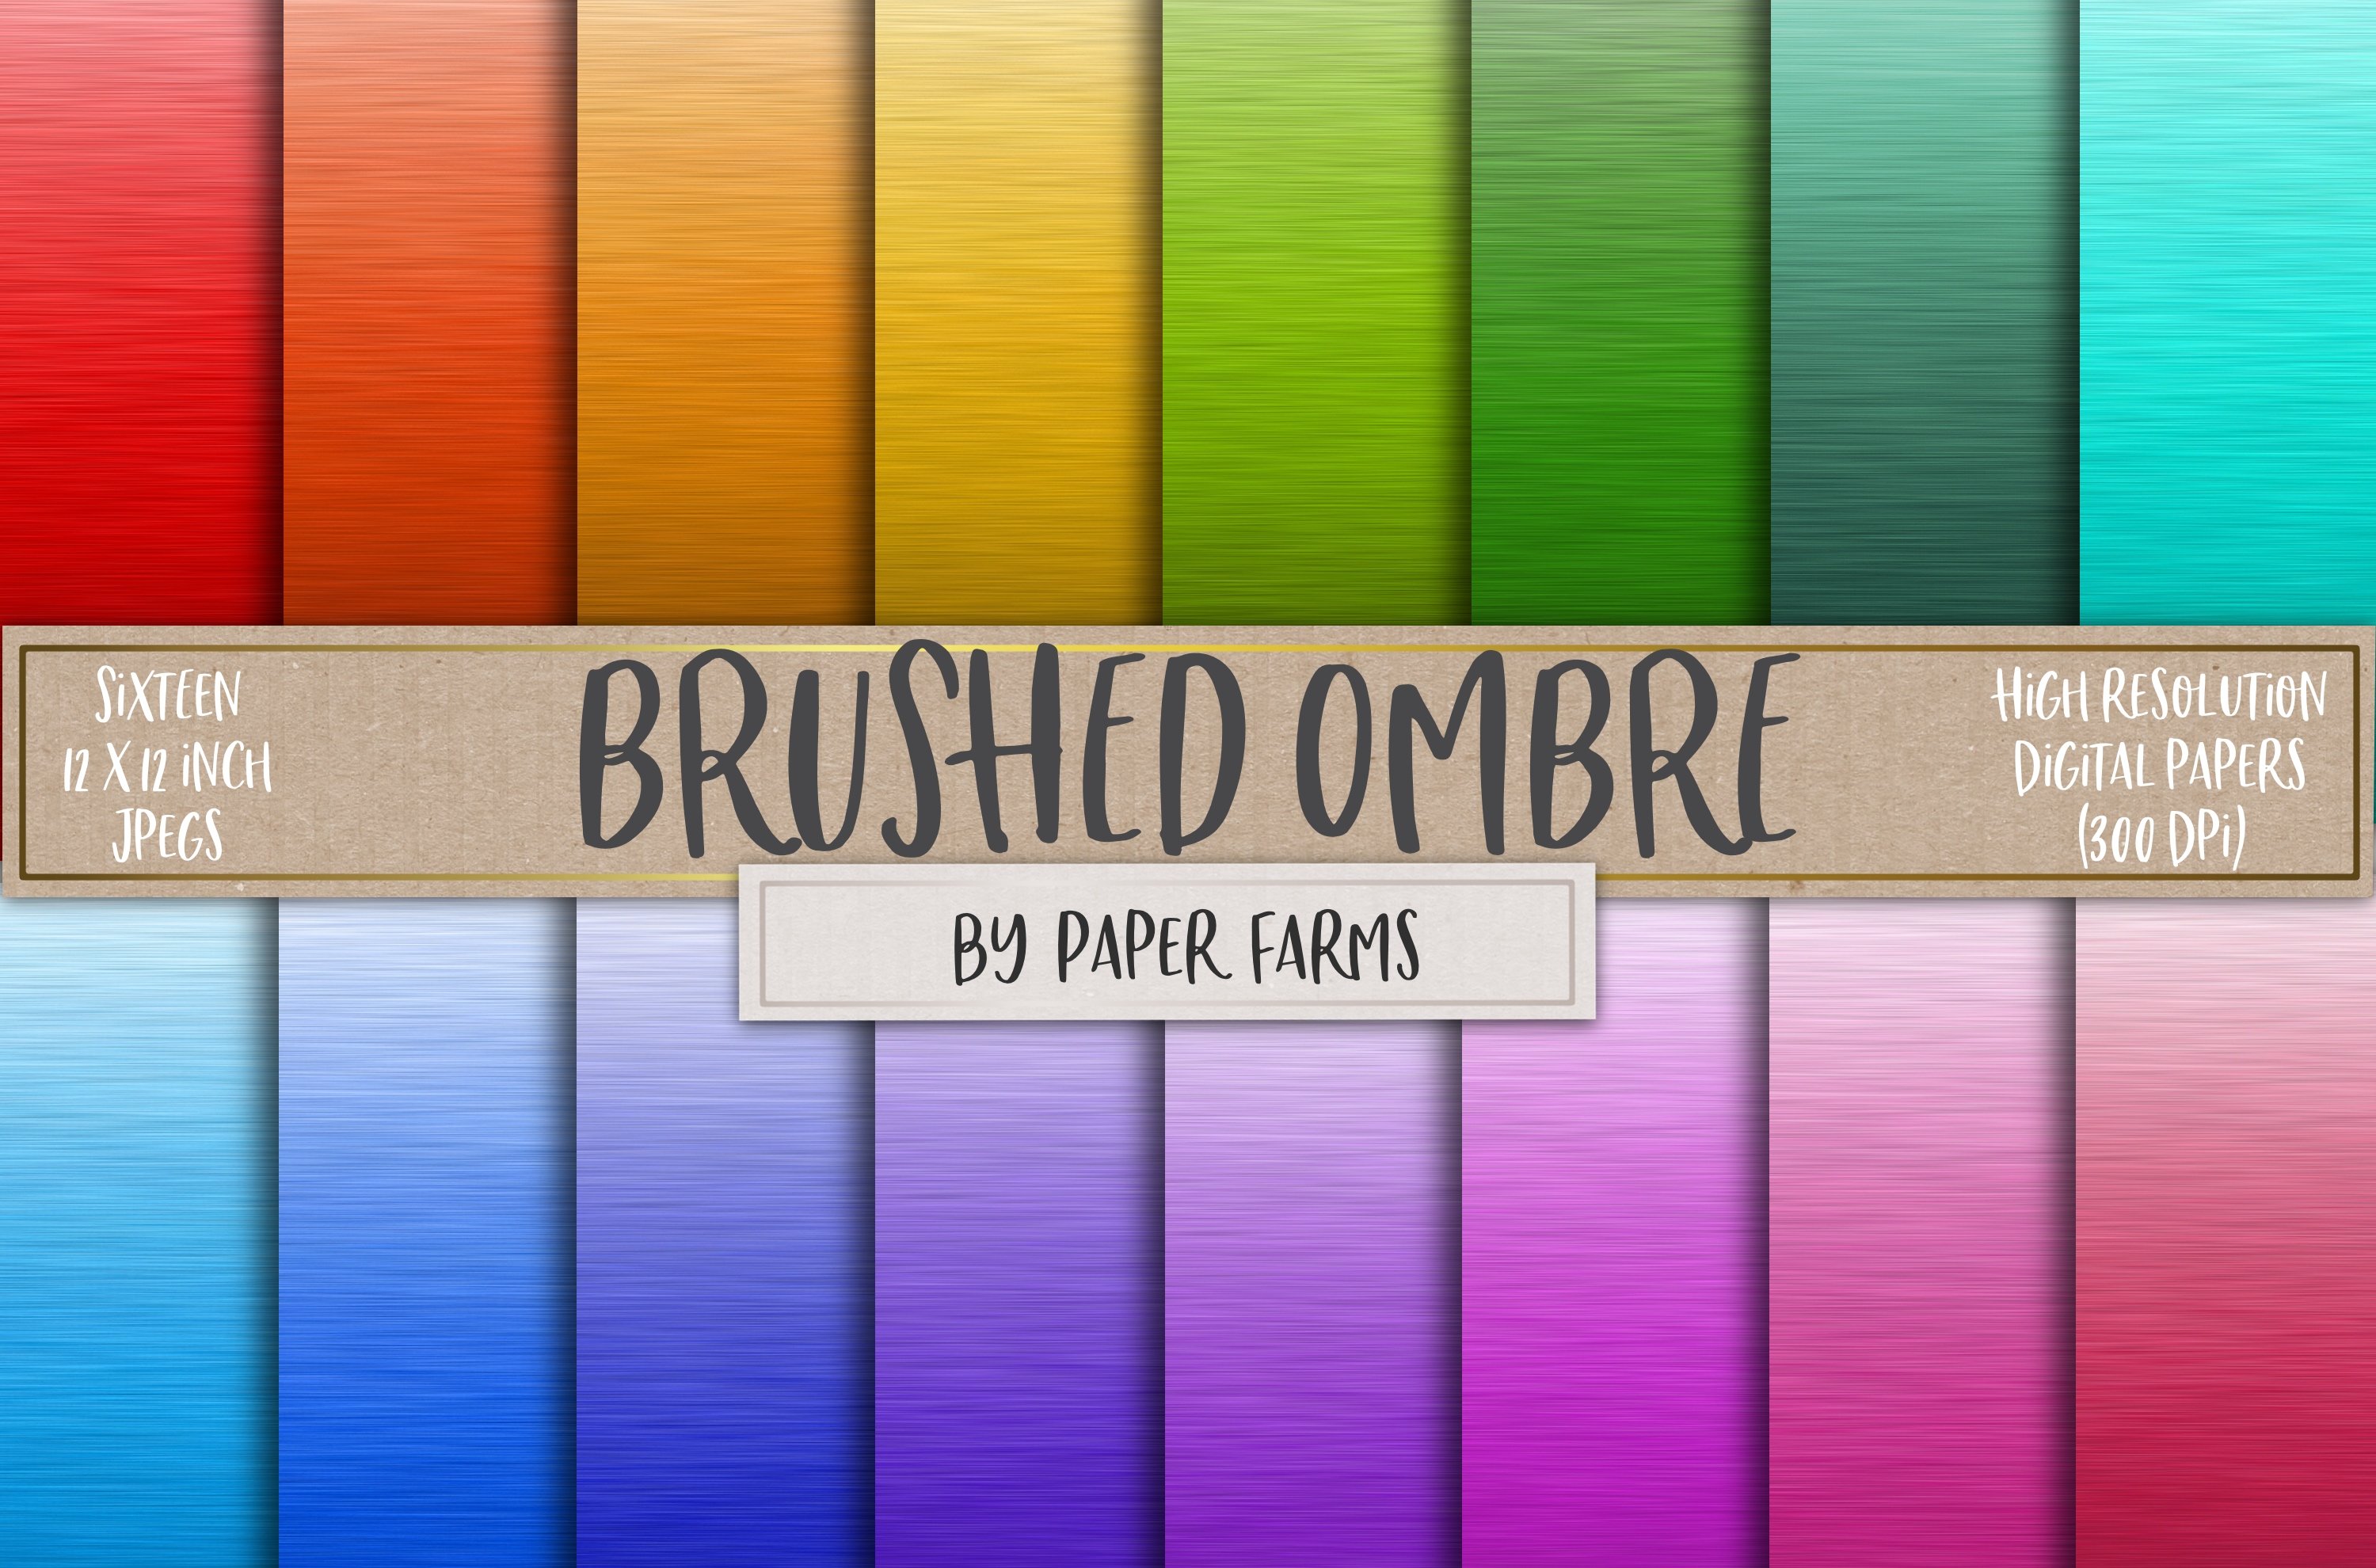 Brushed Ombre Backgrounds cover image.